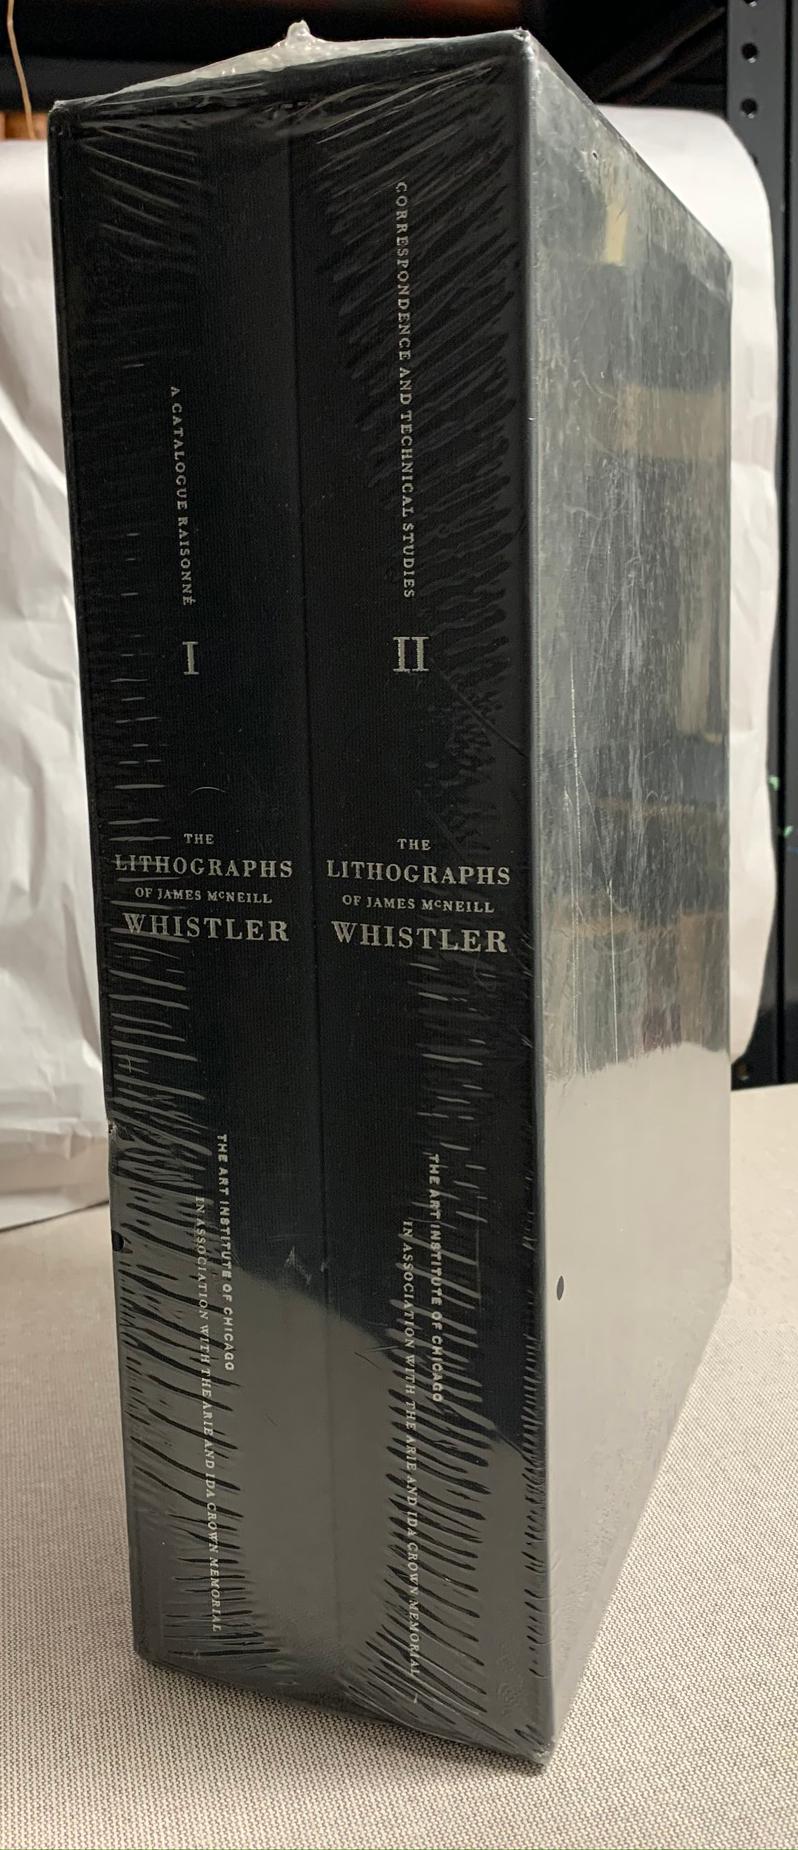 Stratis, Harriet K and Martha Tedeschi (editors).  The Lithographs of JAMES MCNEILL WHISTLER. Volume I: A Catalogue Raisonné. Volume II: Correspondence and Technical Studies. Contributions by numerous authors; volume I: 520 pp.; volume II: 472 pp.;